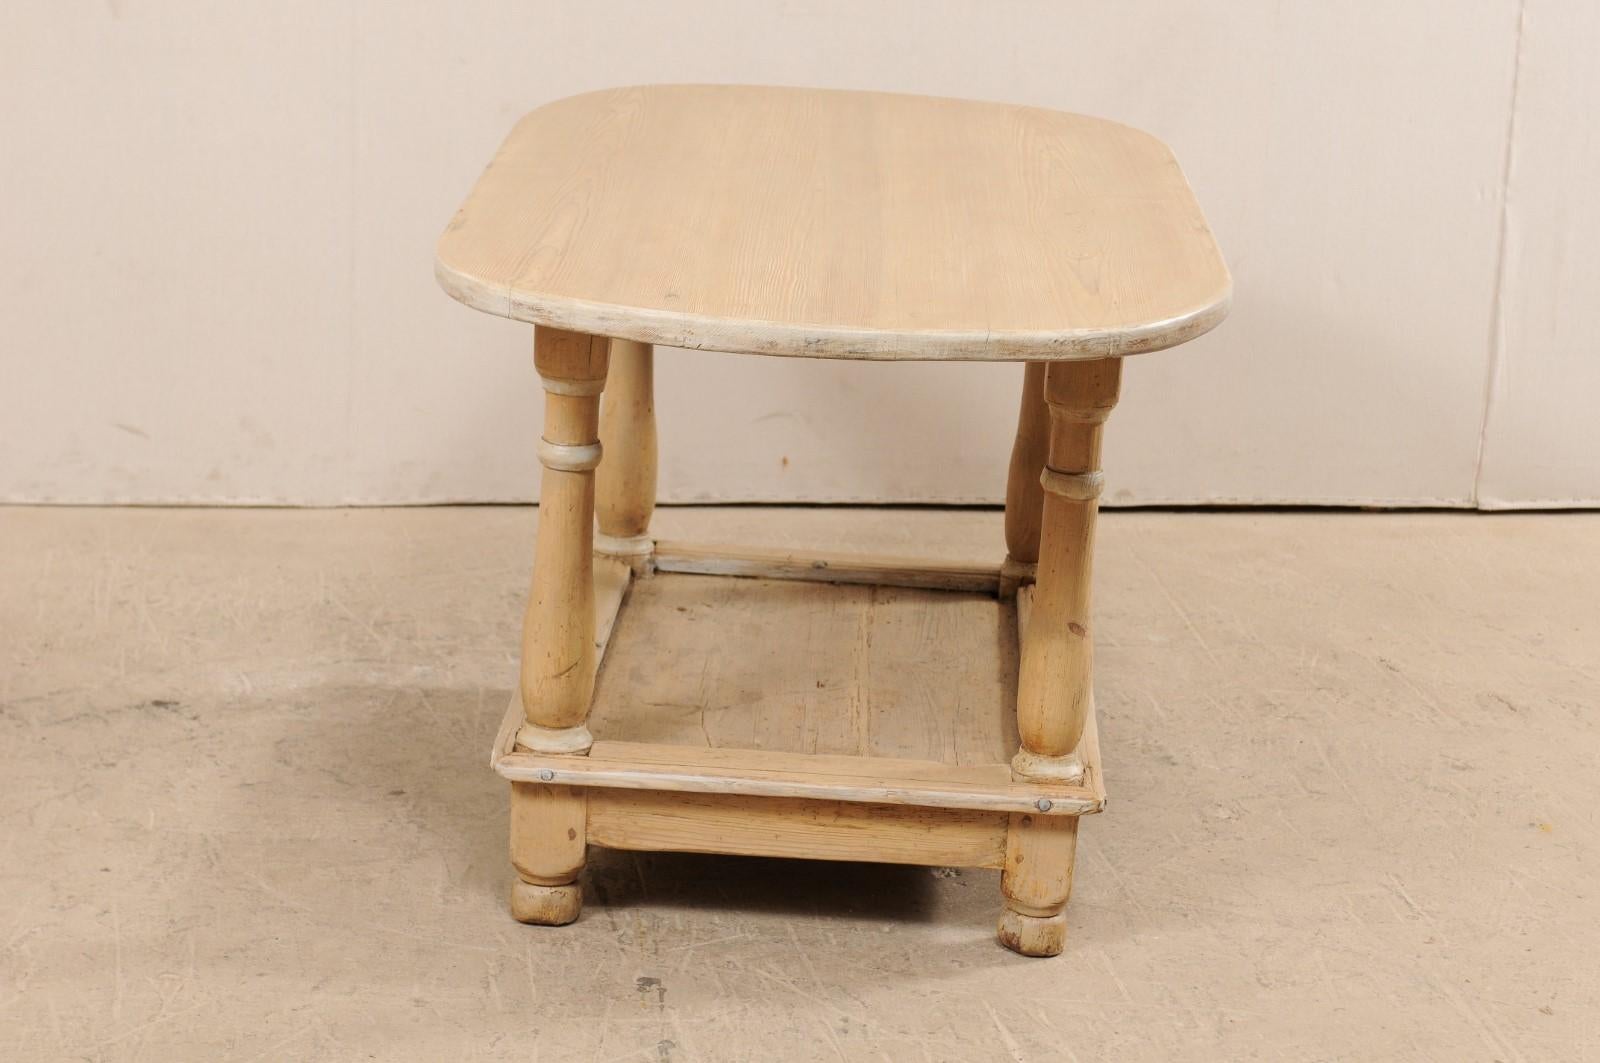 An Early 19th Century Swedish Bleached & Painted Wood Two-Tier Oval Table For Sale 5